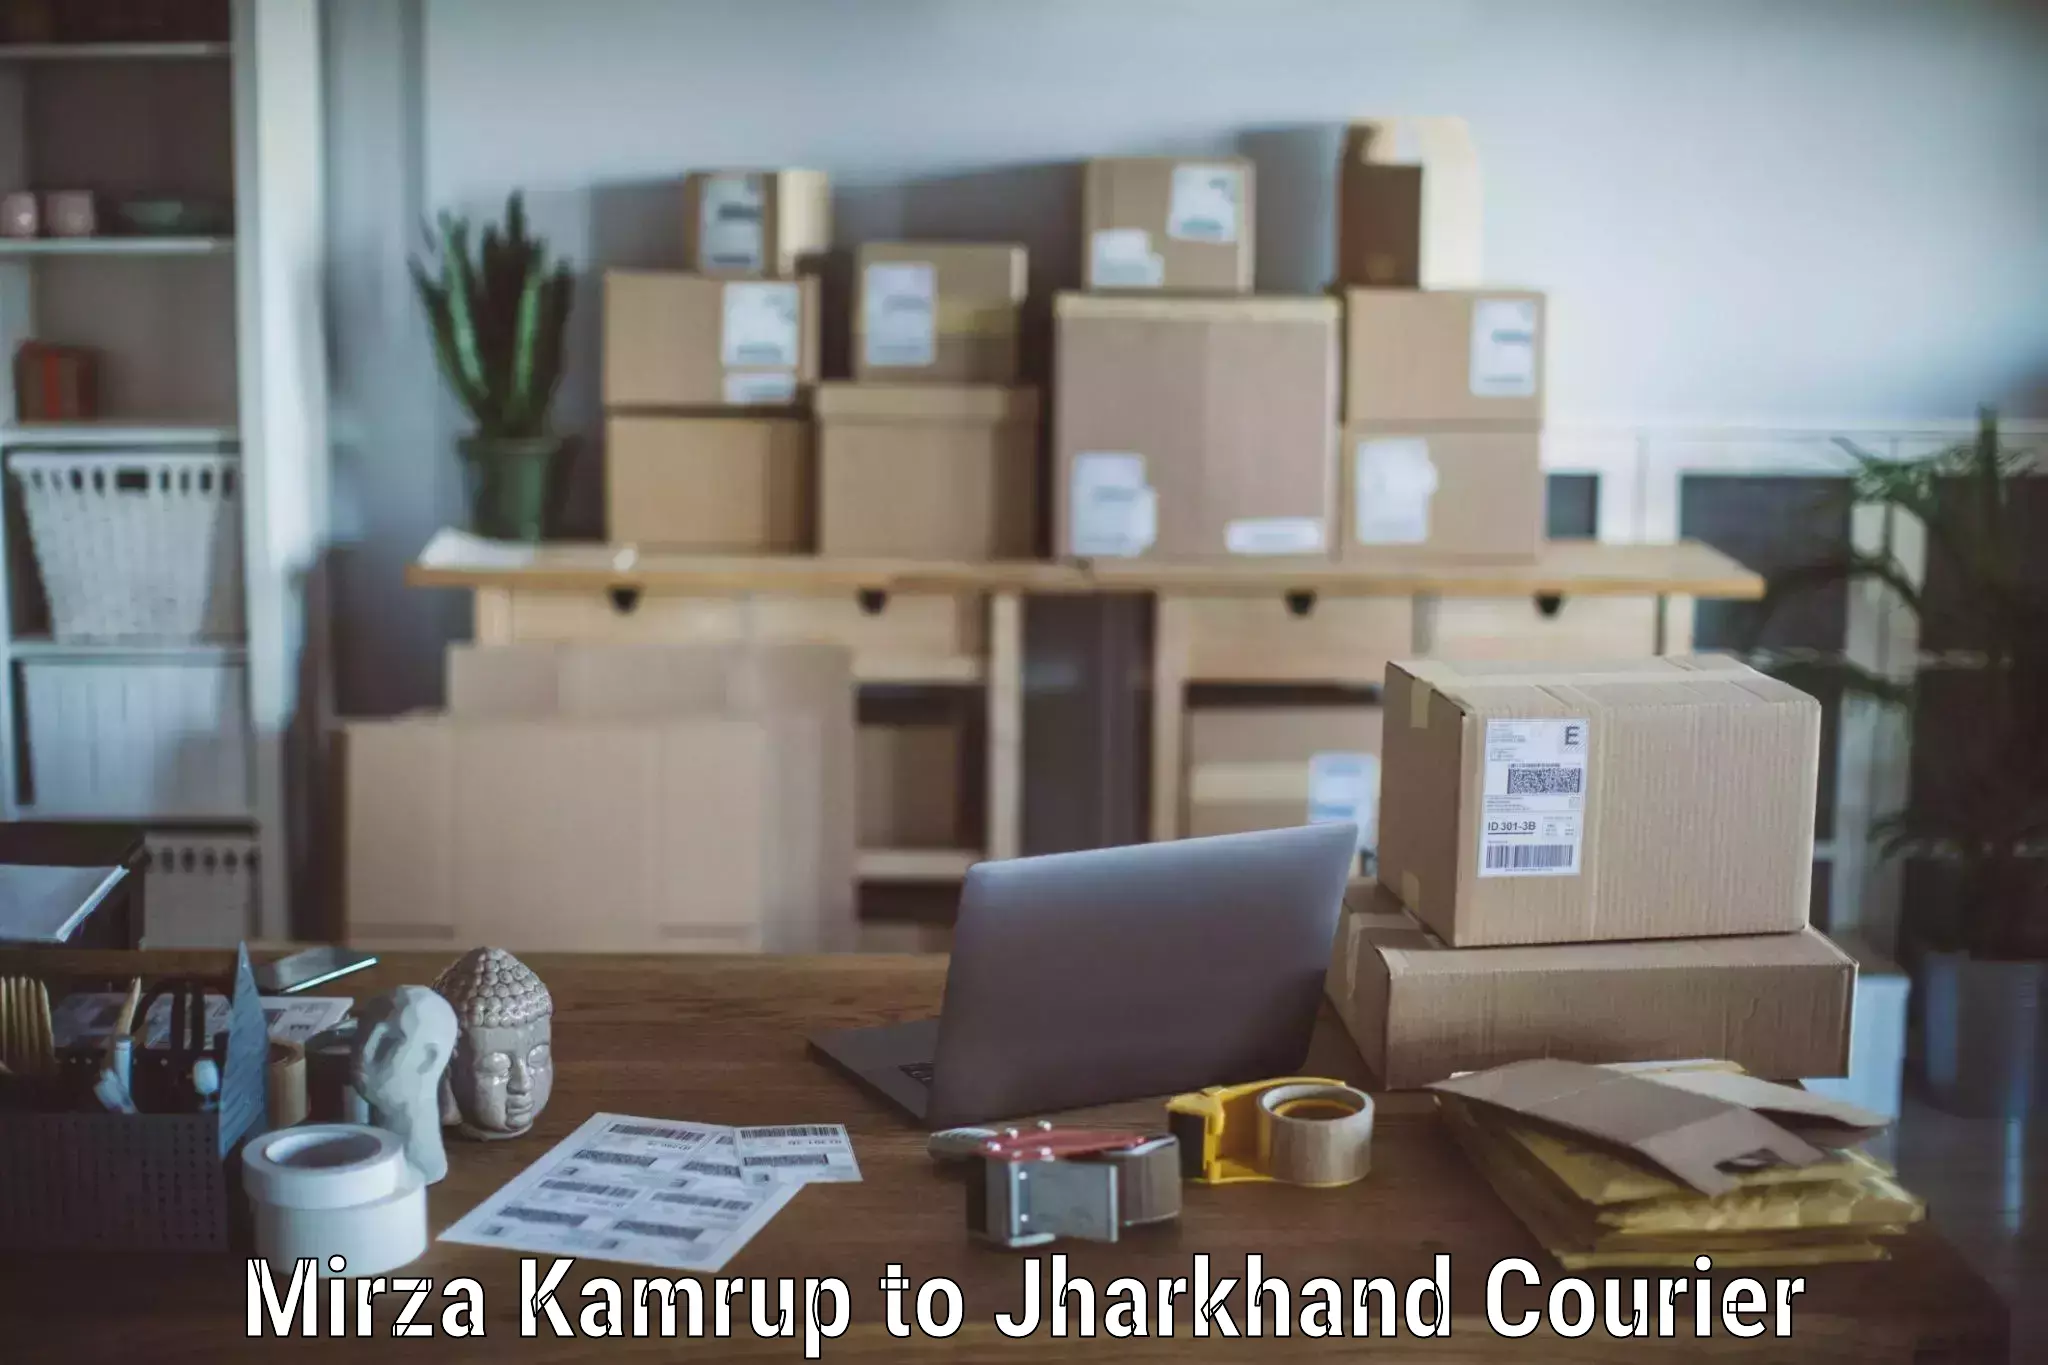 Quality moving company Mirza Kamrup to Domchanch